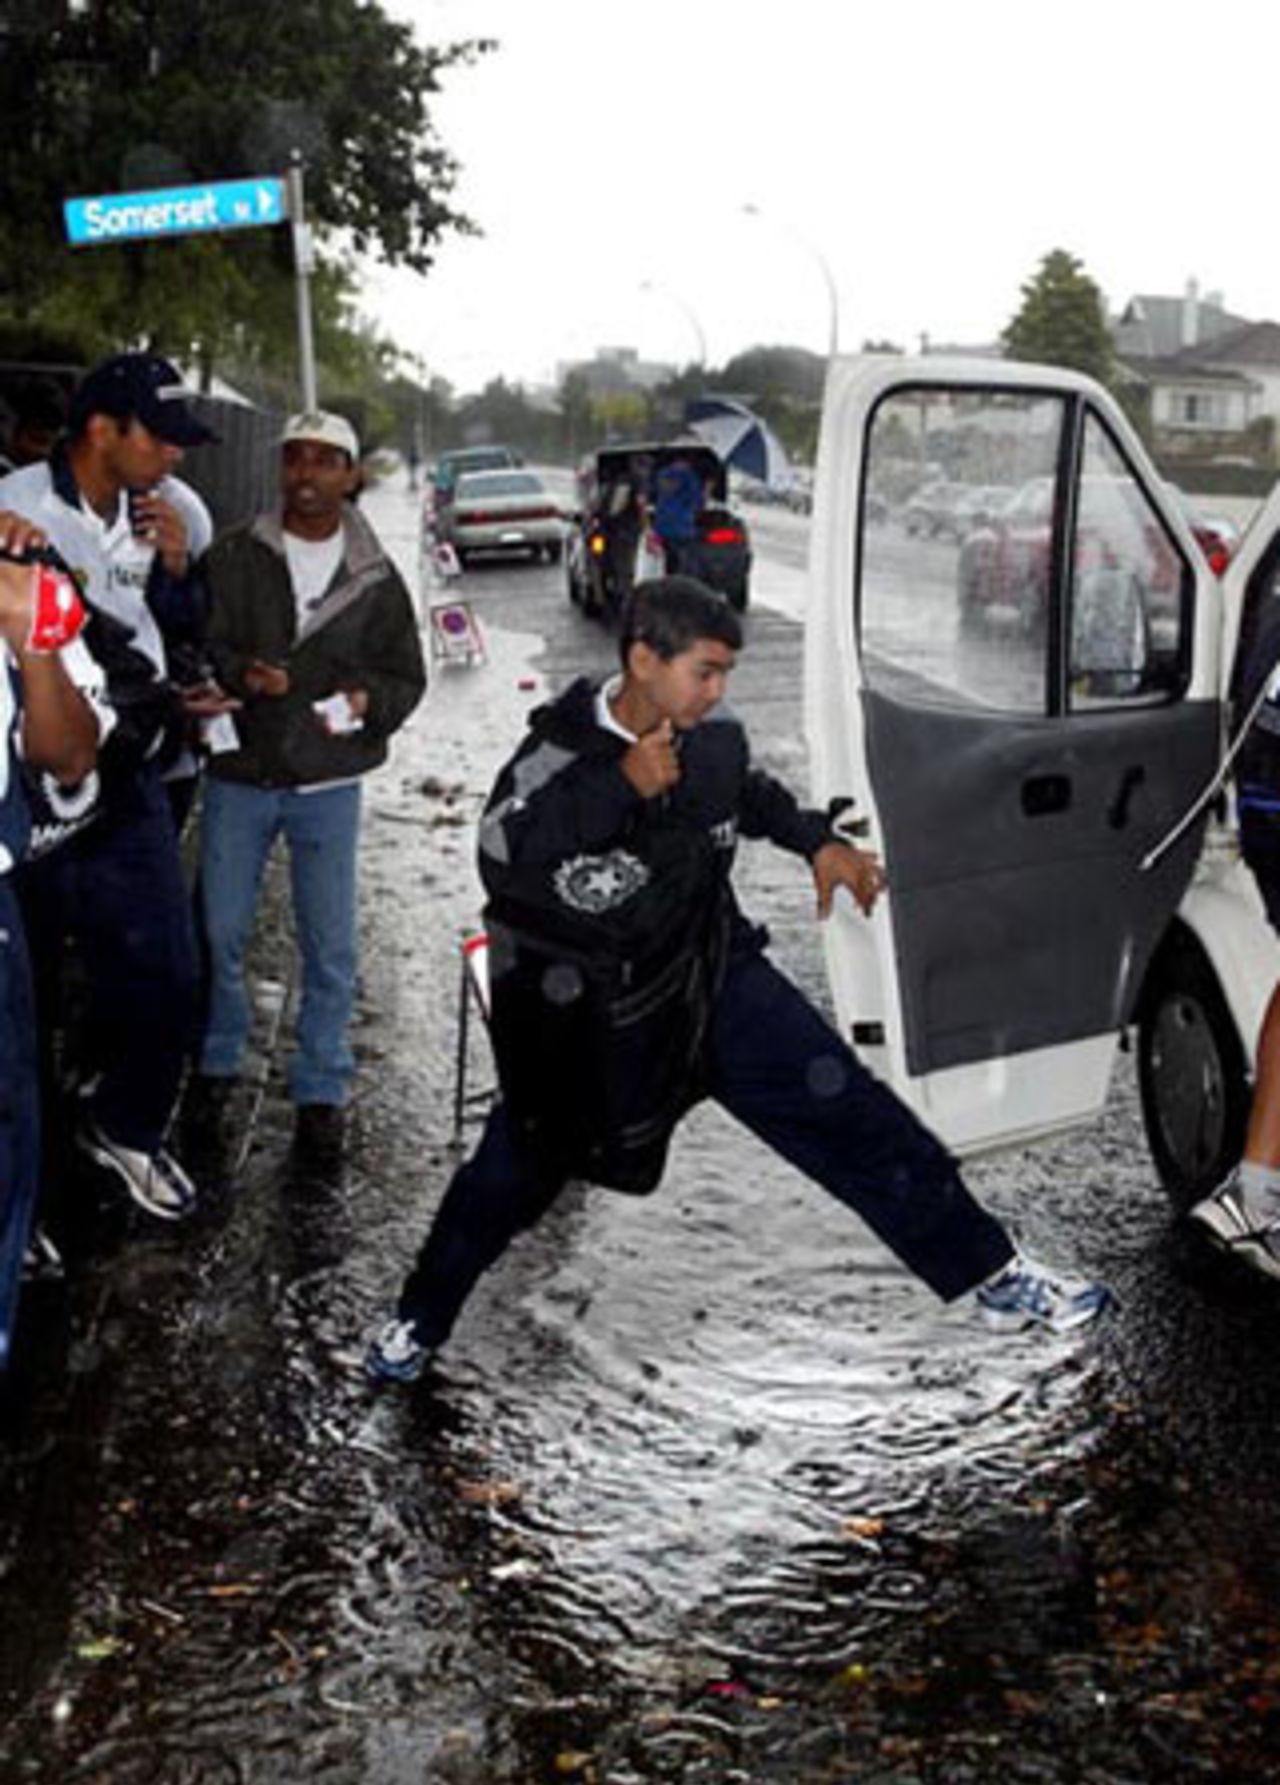 Indian player Parthiv Patel jumps over a puddle to get into the team bus as he leaves the ground. Team-mate Rahul Dravid (left) looks on. 2nd Test: New Zealand v India at Westpac Park, Hamilton, 19-23 December 2002 (19 December 2002).